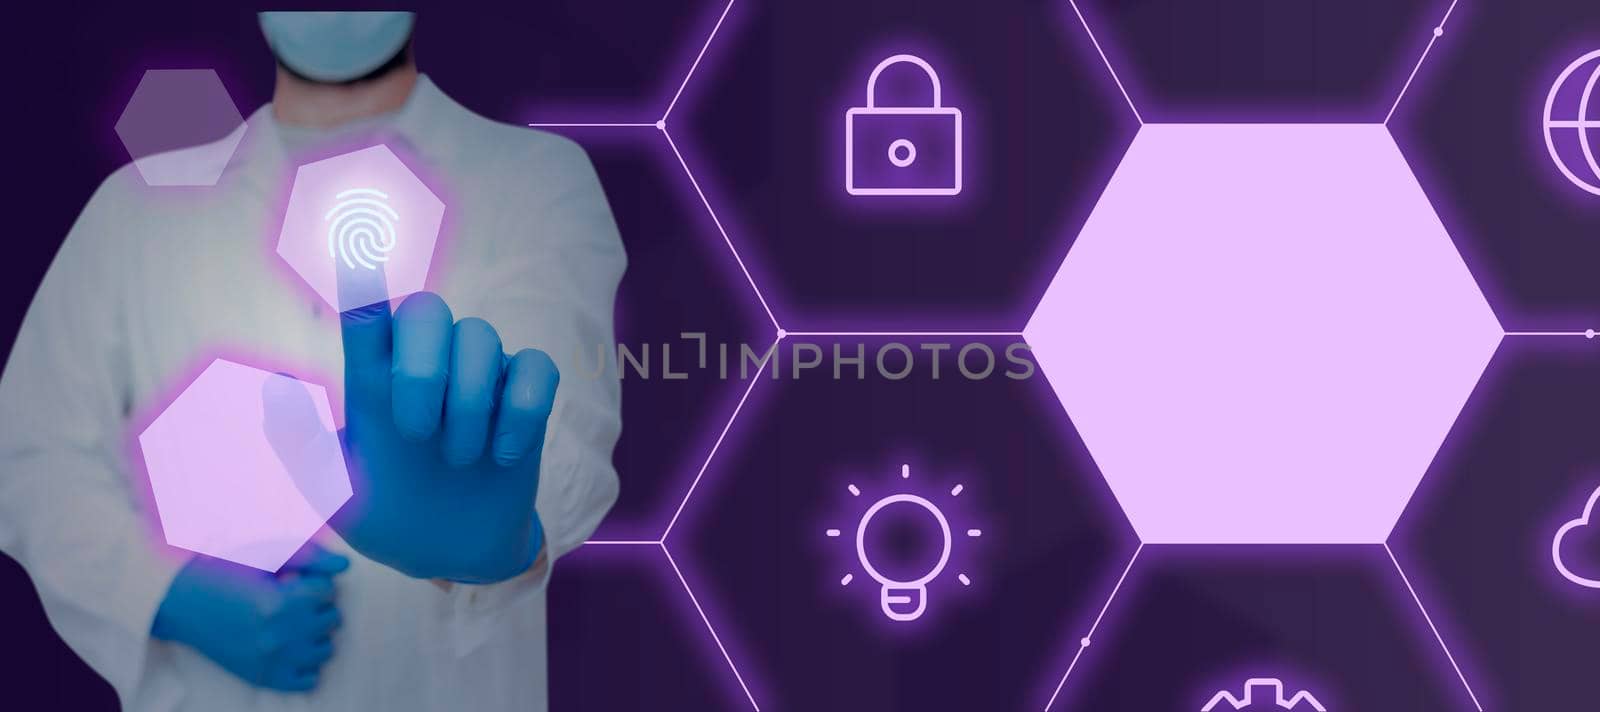 Doctor Pointing With One Finger On Sign And Presenting Crutial Ideas In Futuristic Design. Scientist With Mask And Gloves Pressing On Symbol And Showing Important Information. by nialowwa